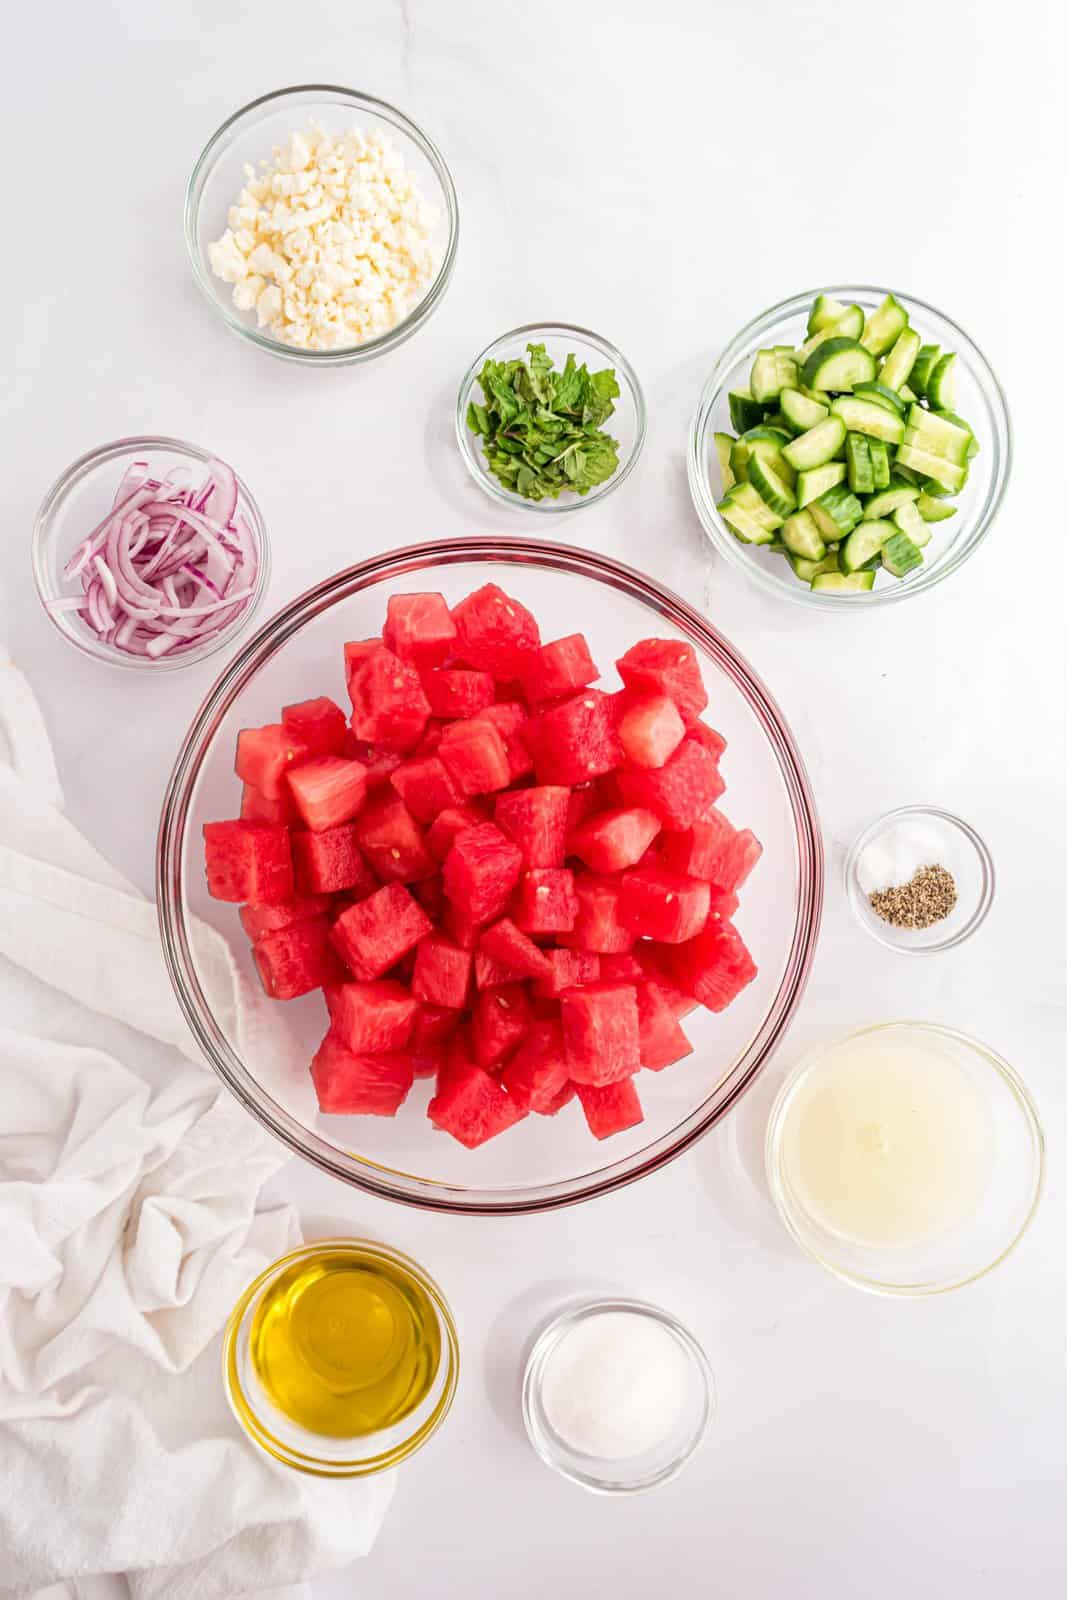 Ingredients needed: ime juice, granulated sugar, kosher salt, pepper, olive oil, watermelon, baby cucumbers, red onion, feta cheese and mint leaves.